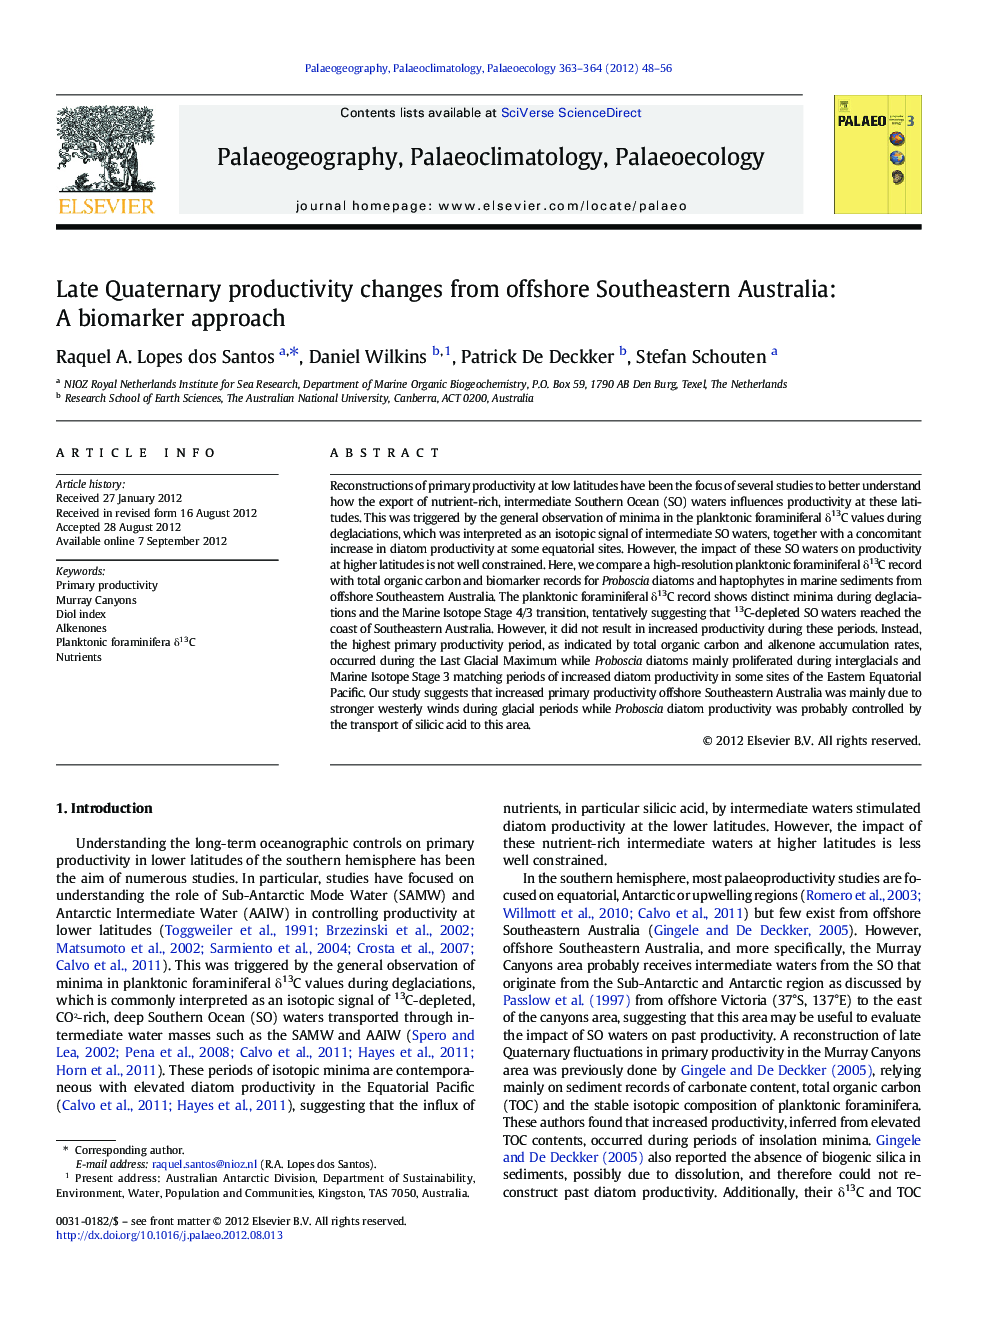 Late Quaternary productivity changes from offshore Southeastern Australia: A biomarker approach